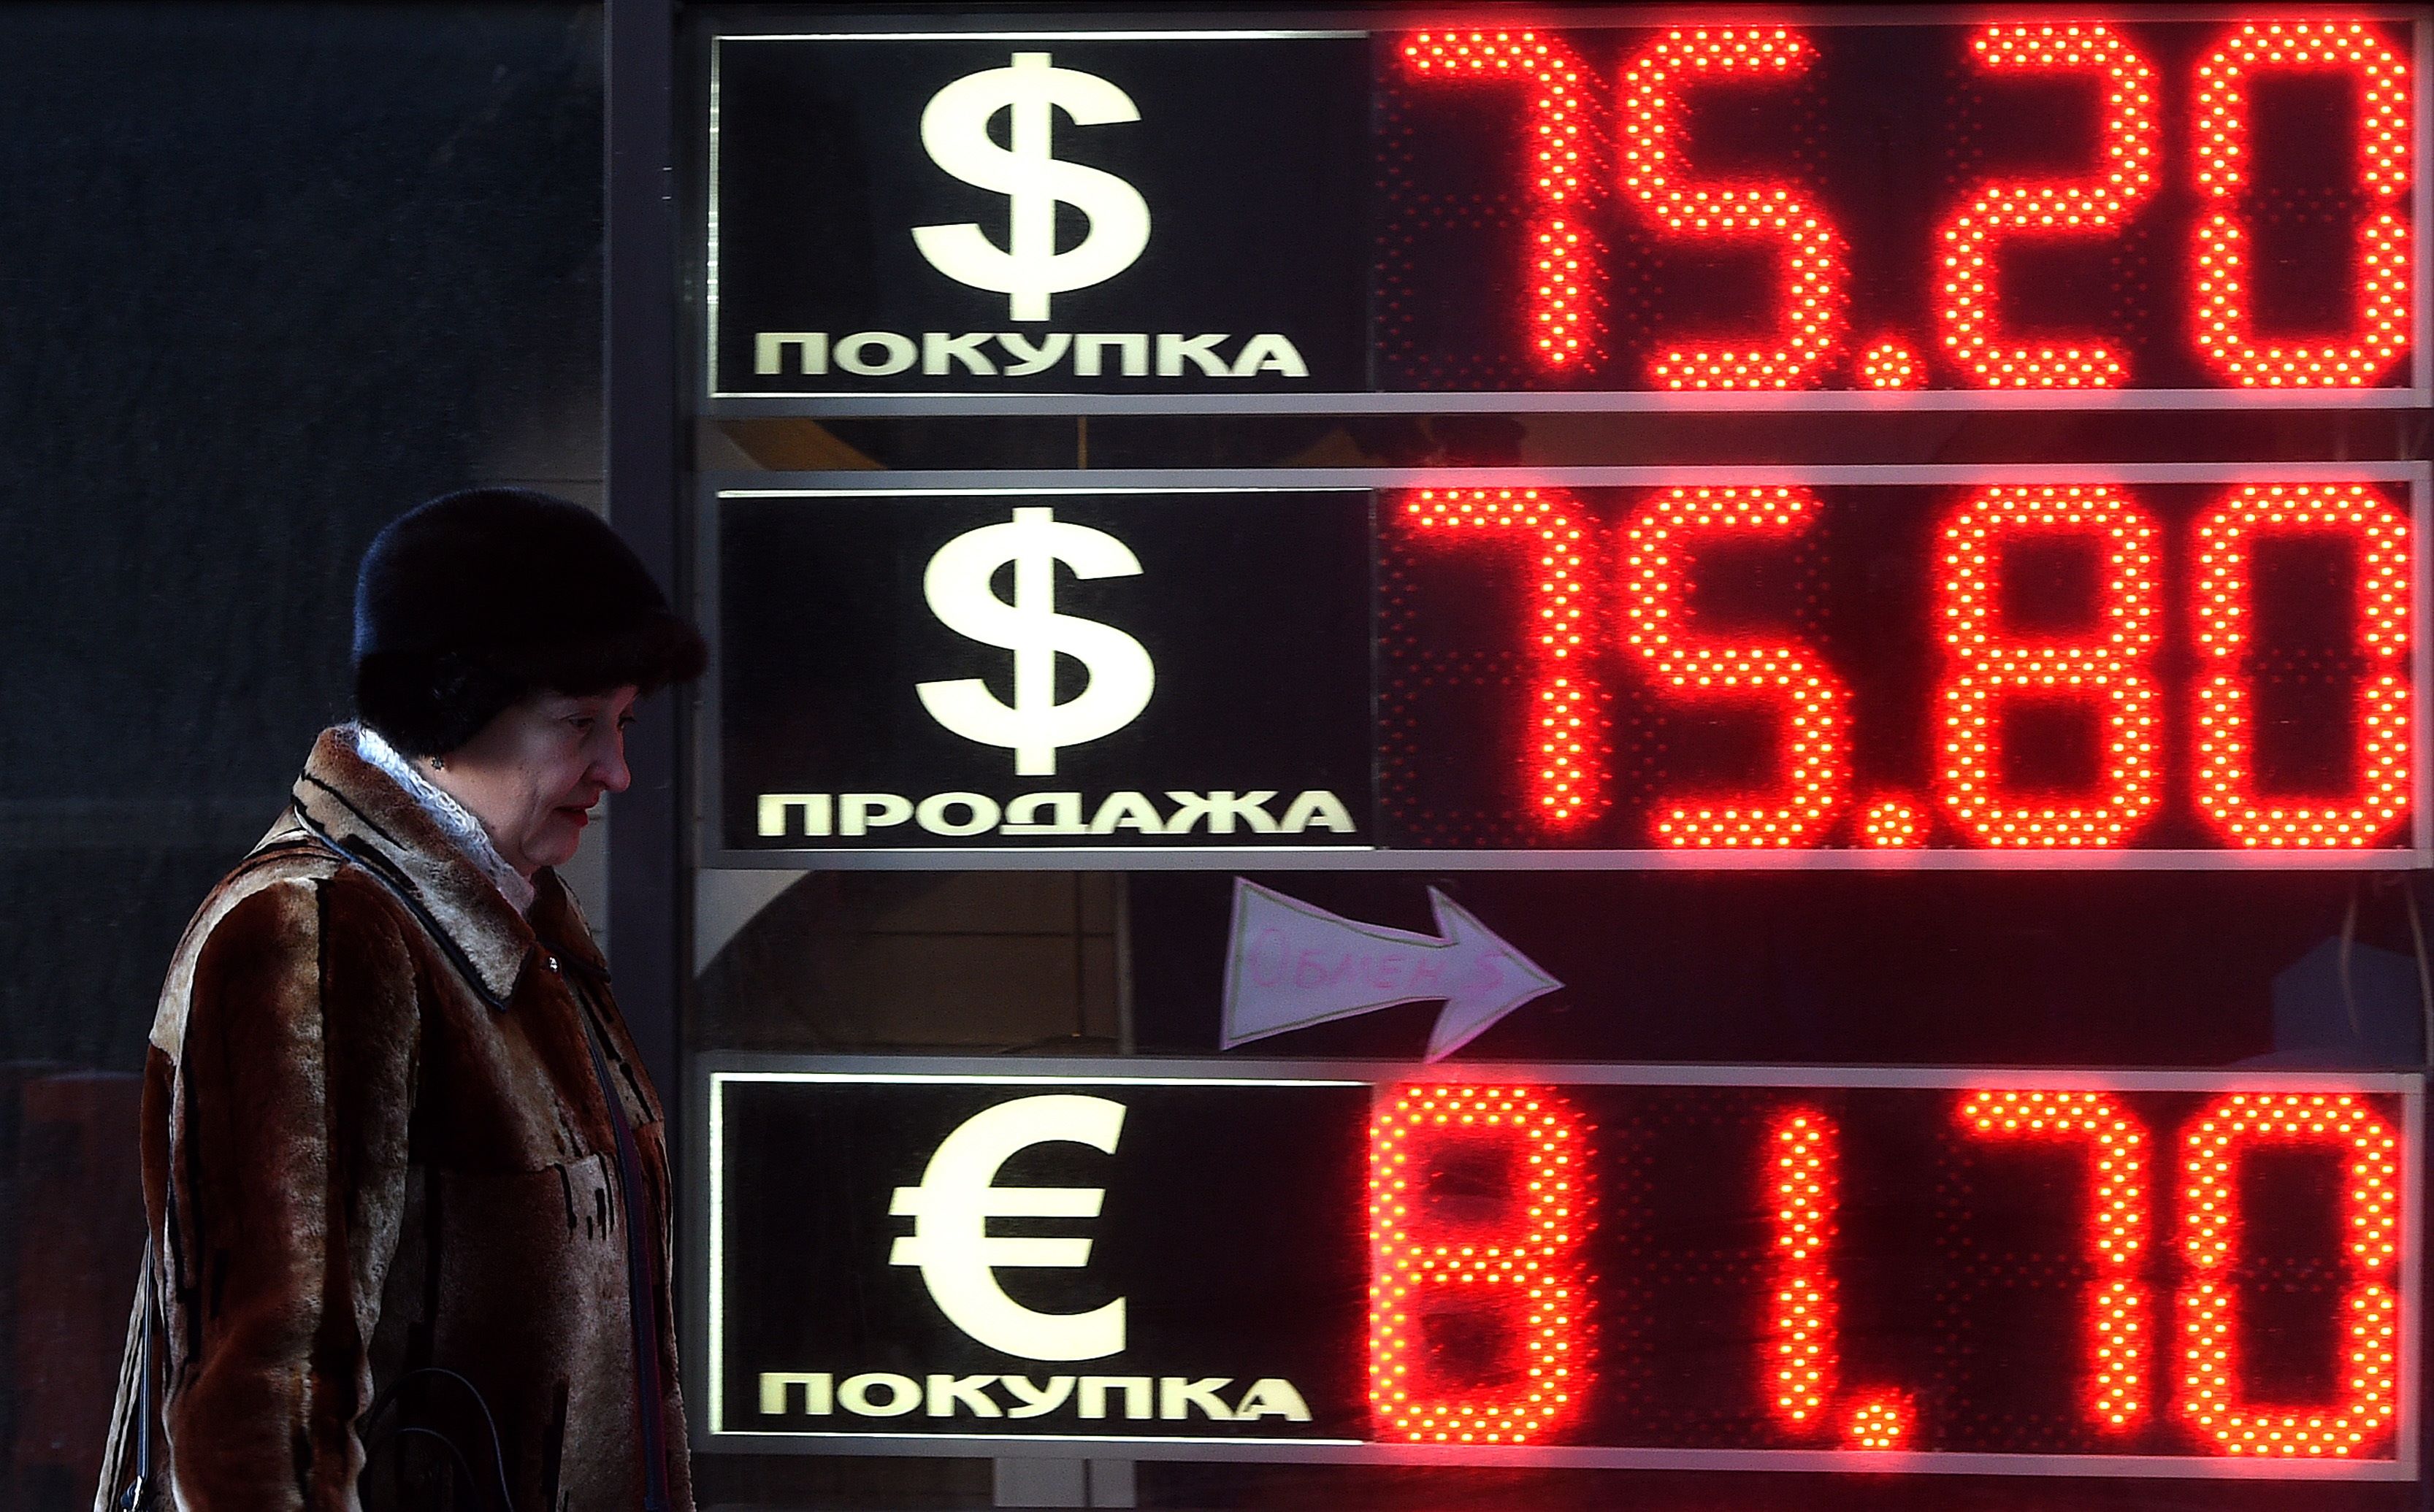 A woman walks past a board listing foreign currency rates against the Russian ruble in Moscow, on January 11, 2016. Russia's battered ruble on January 11 fell to 76 against the dollar and over 83 against the euro for the first time since the currency slump of December 2014. AFP PHOTO / VASILY MAXIMOV